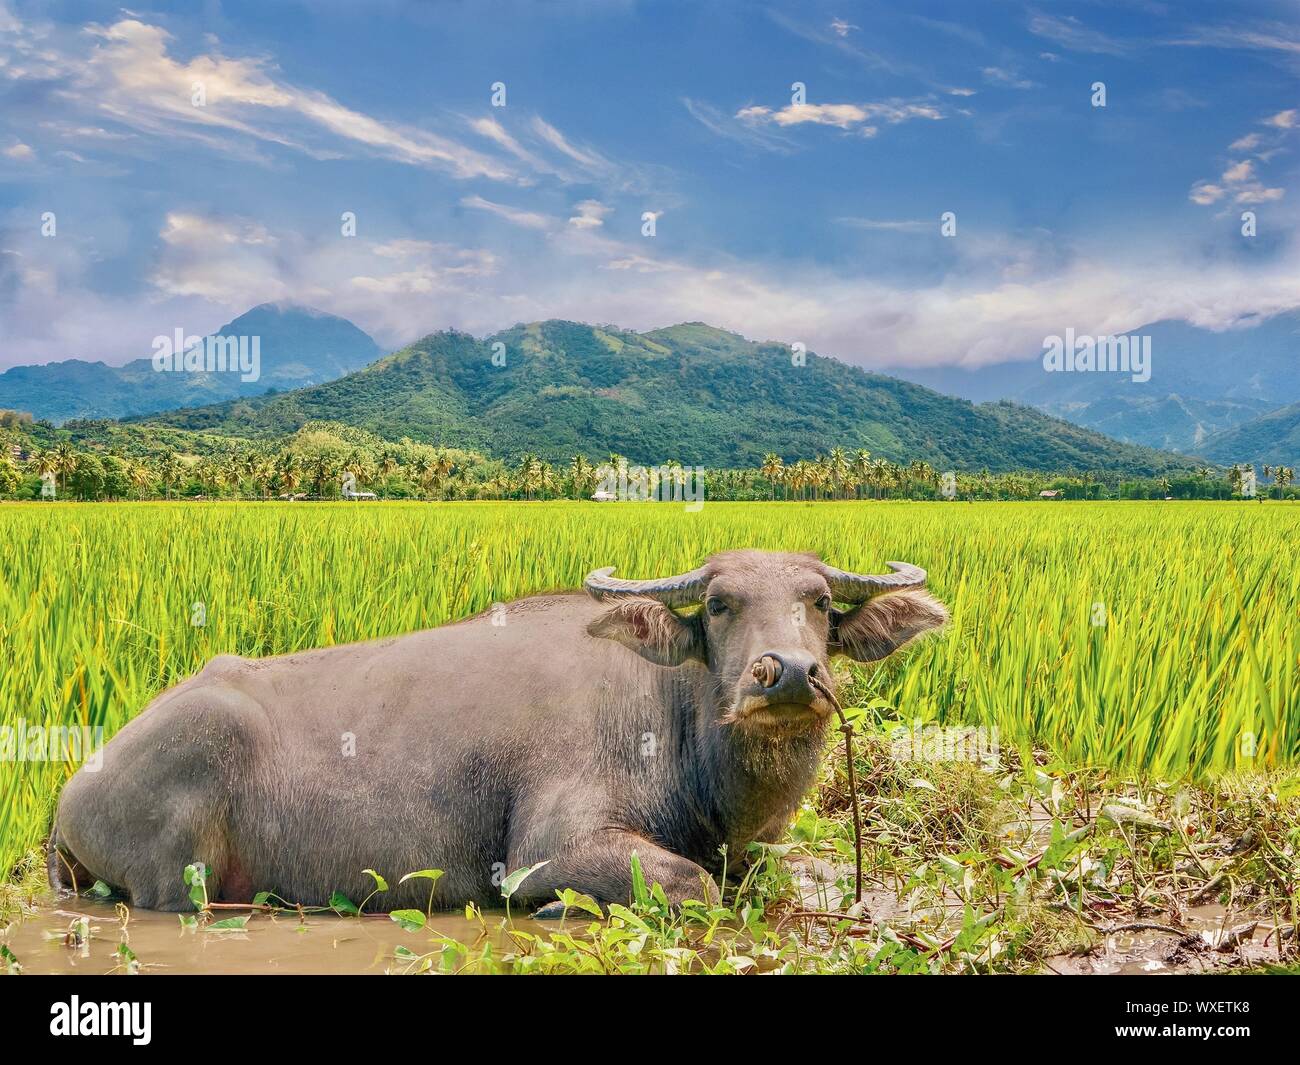 The carabao (Filipino: kalabaw) is a species of the domestic Asian water buffalo (Bubalus bubalis) native to the Philippines. It plows rice fields. Stock Photo